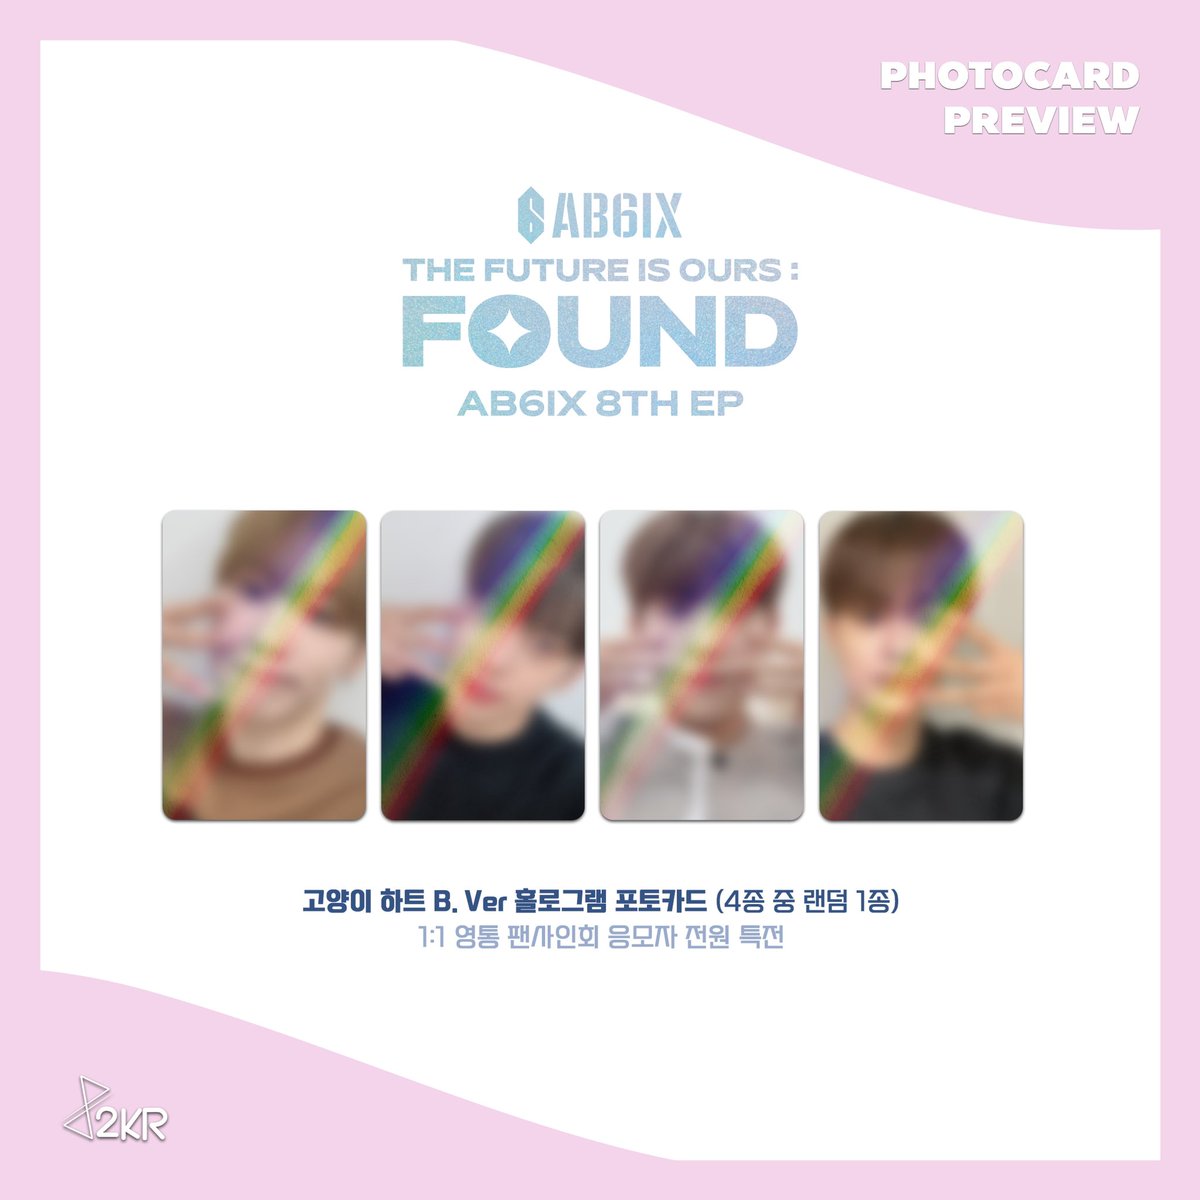 ✨ AB6IX - 8TH EP [THE FUTURE IS OURS : FOUND] FANSIGN EVENT✨ 😸 PHOTOCARD PREVIEW 😸 💝 응모자 특전 : 고양이 하트 홀로그램 포토카드 4종 랜덤 1종 제공 ⏰ ~ 5월 5일(일) 23:59(KST) 📌 공지 & 응모 링크 🇰🇷 한국 사이트 🔗단체 영통 팬사인회: 82kr-official.kr/surl/P/71 🔗1:1 영통…